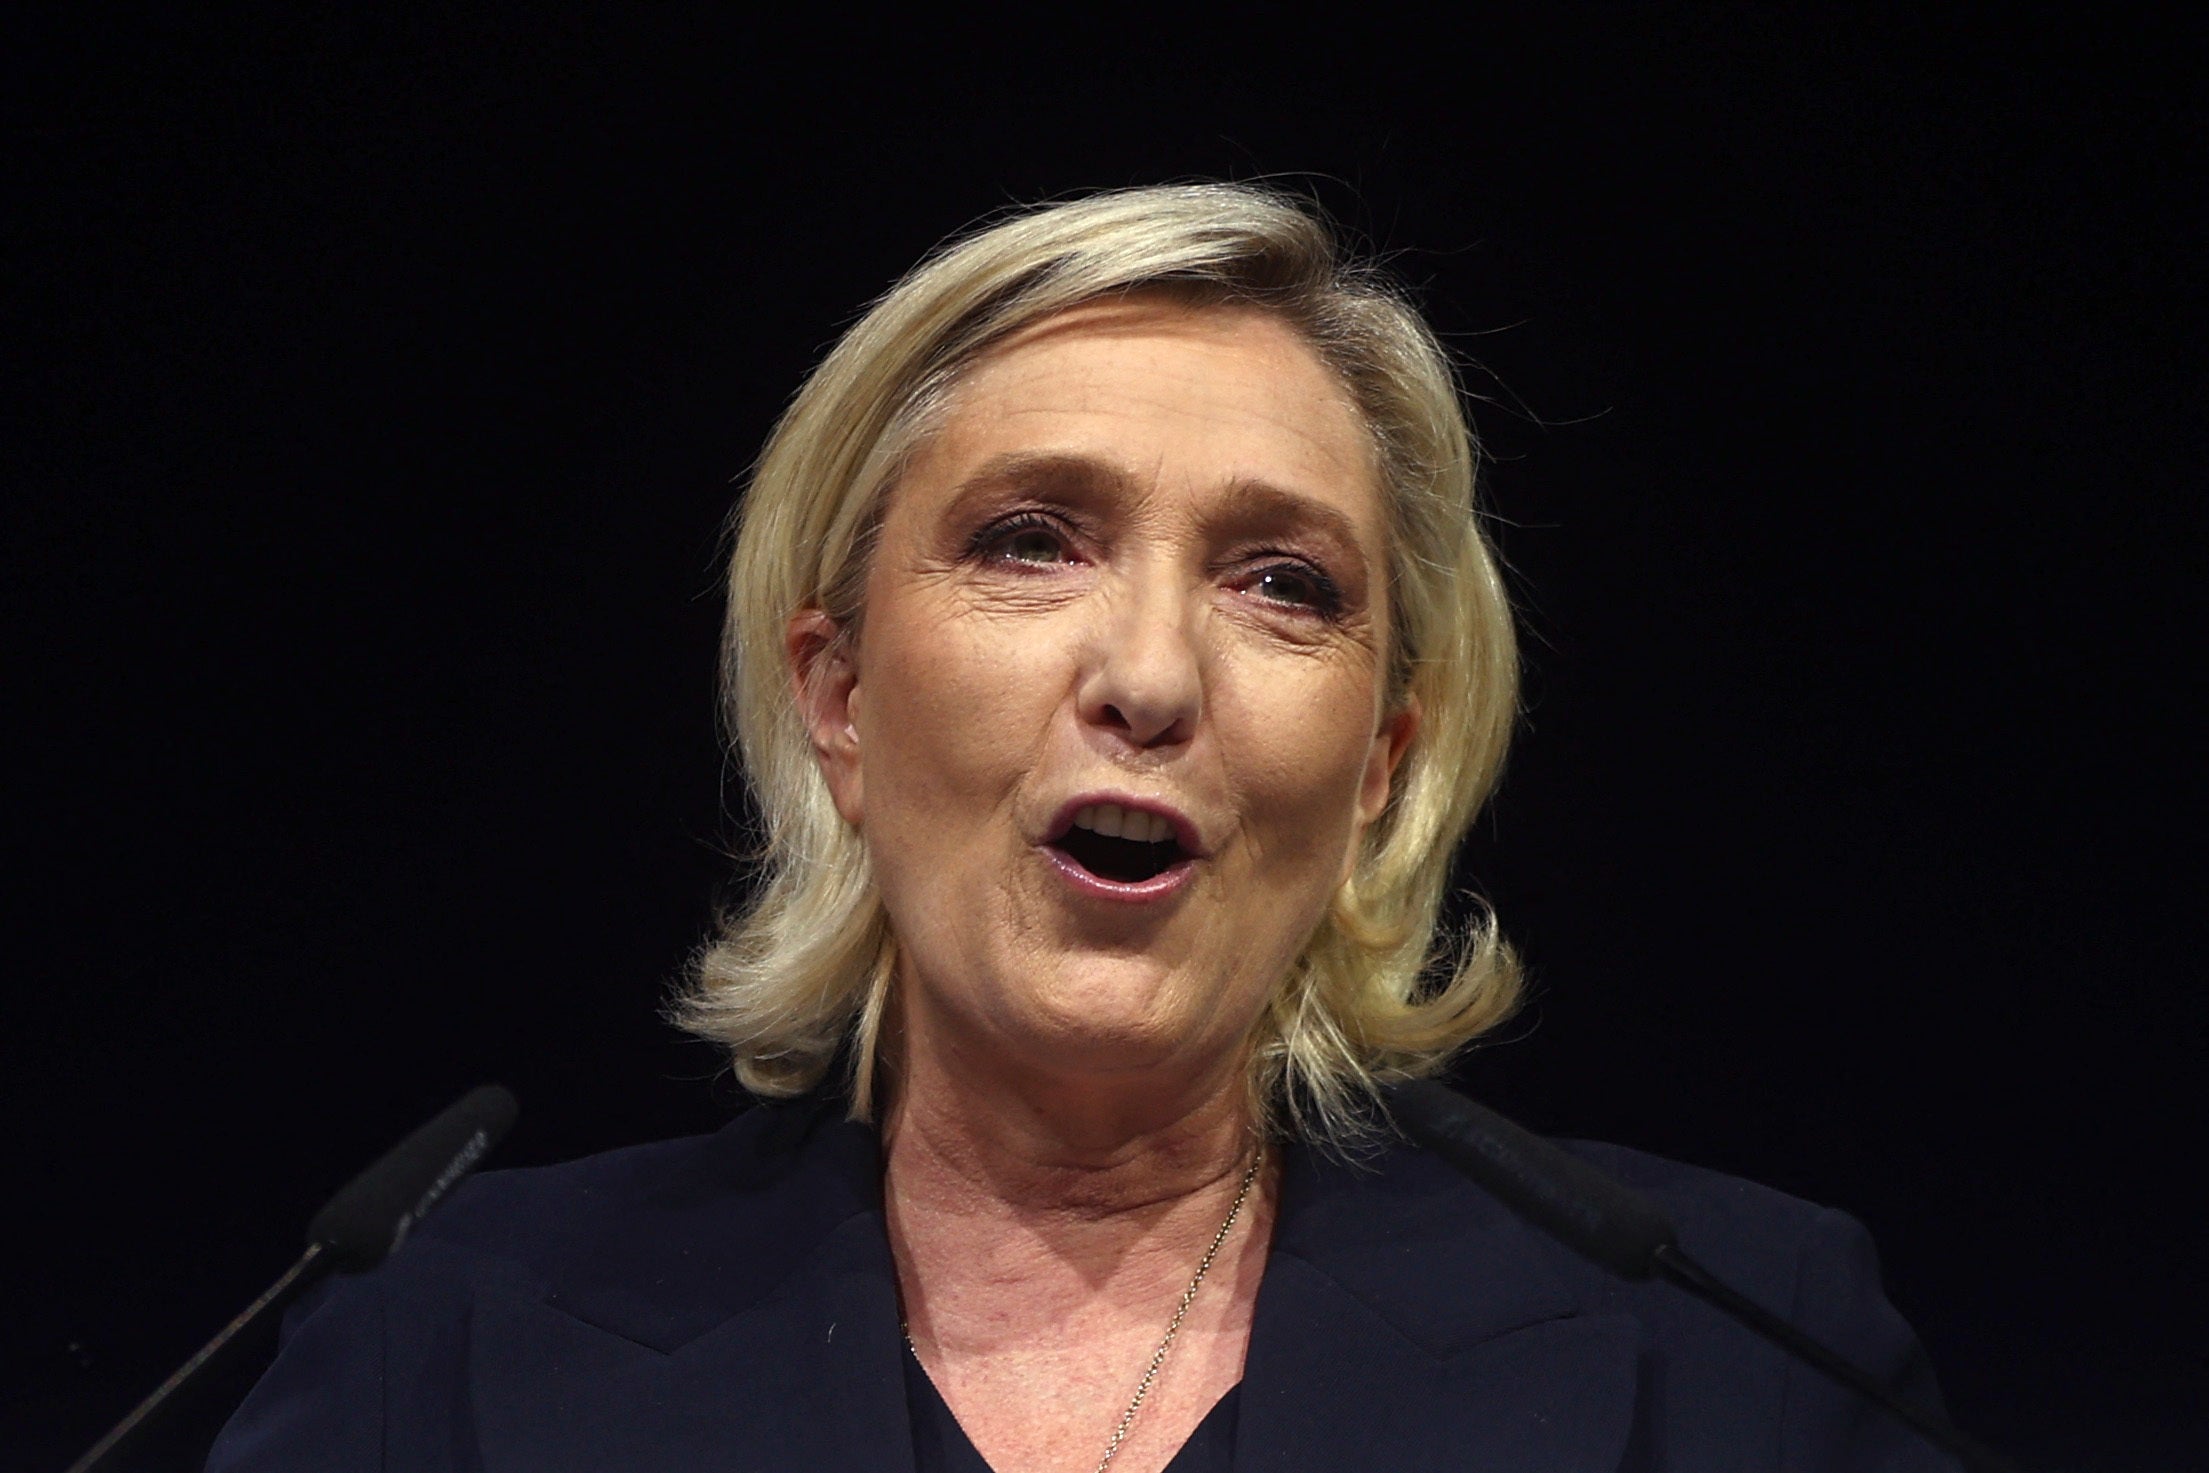 The far-right leader said her party had ‘practically wiped out’ Macron’s centrist coalition